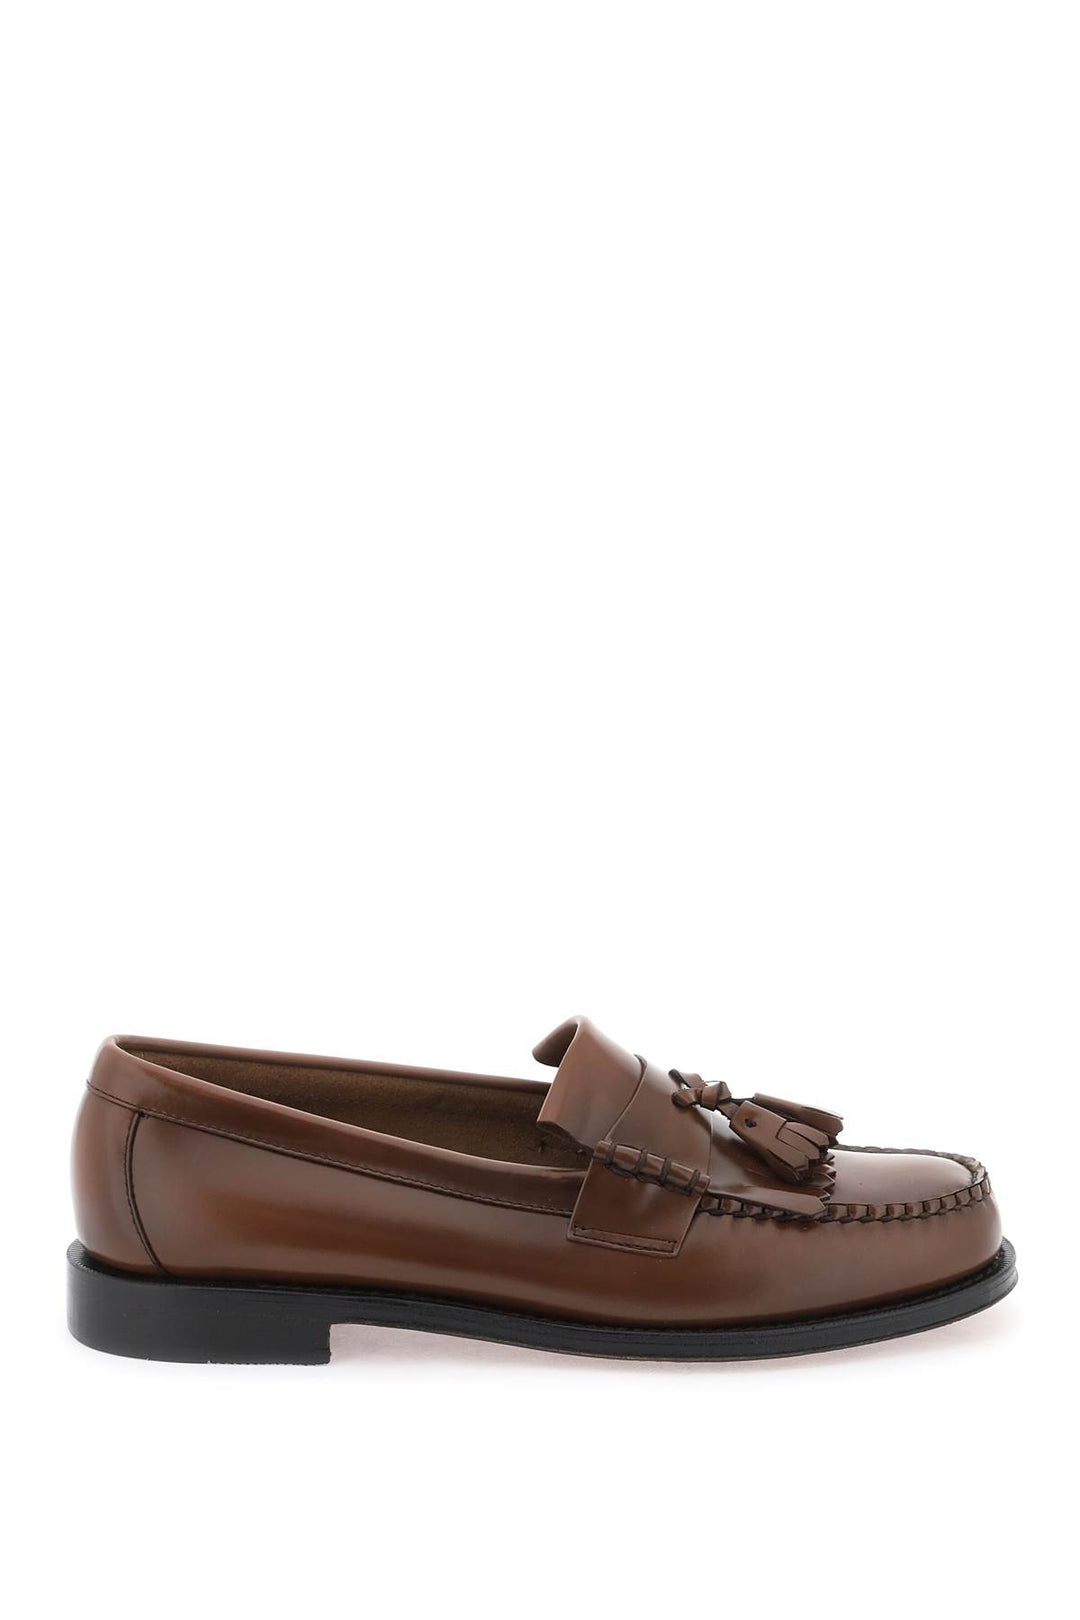 G.H. Bass Esther Kiltie Weejuns Loafers   Marrone